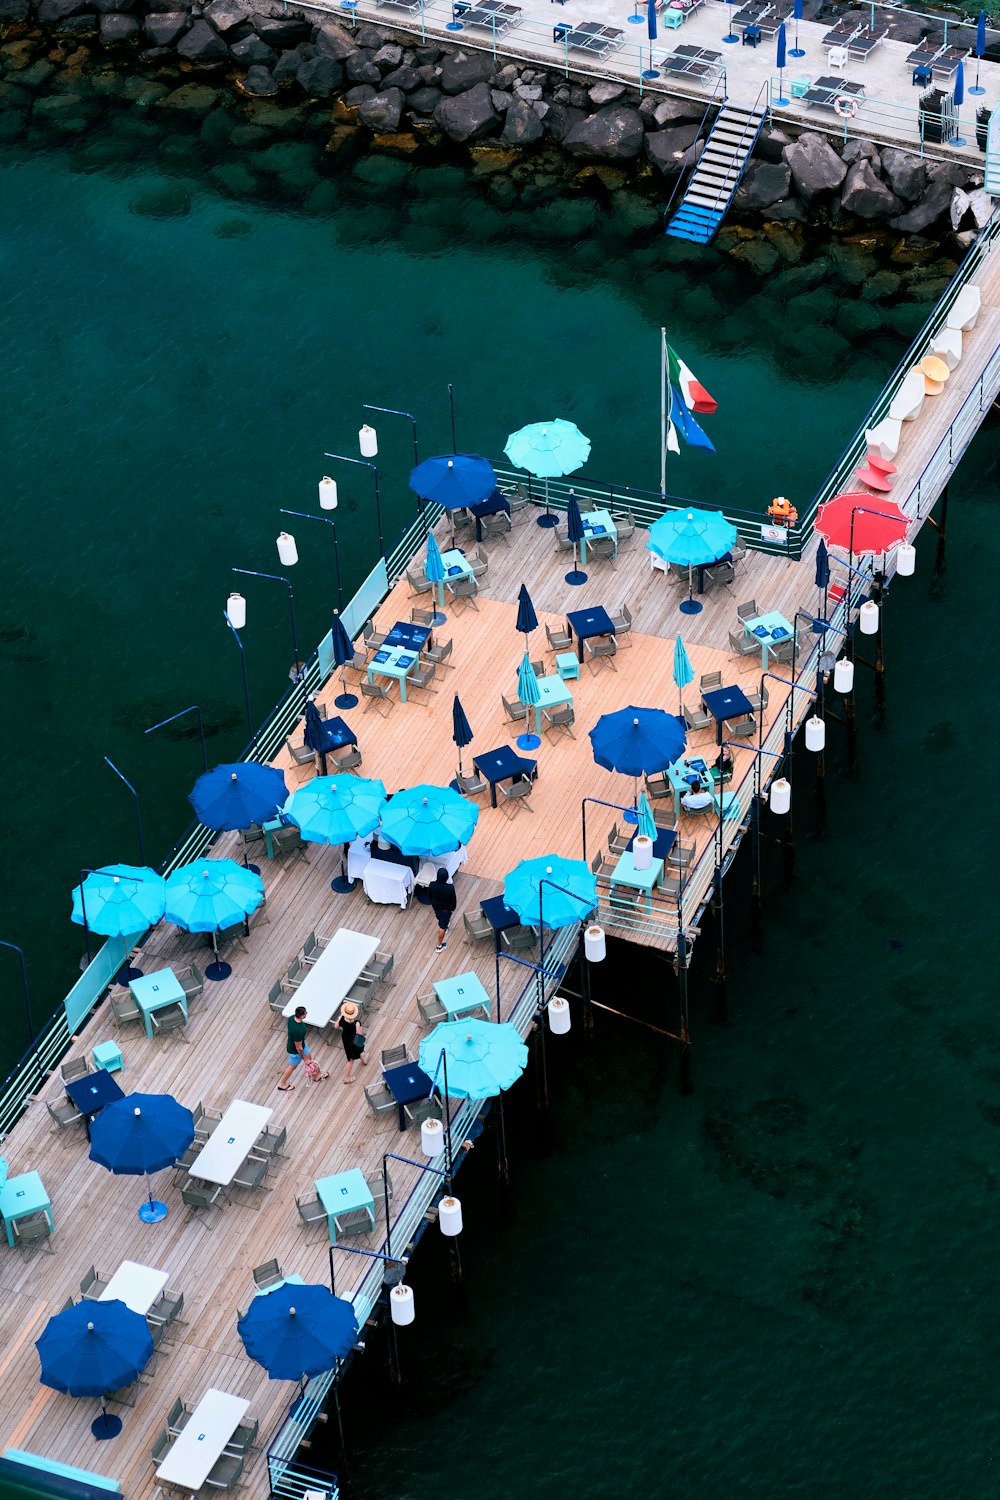 a group of people sitting on a dock with umbrellas